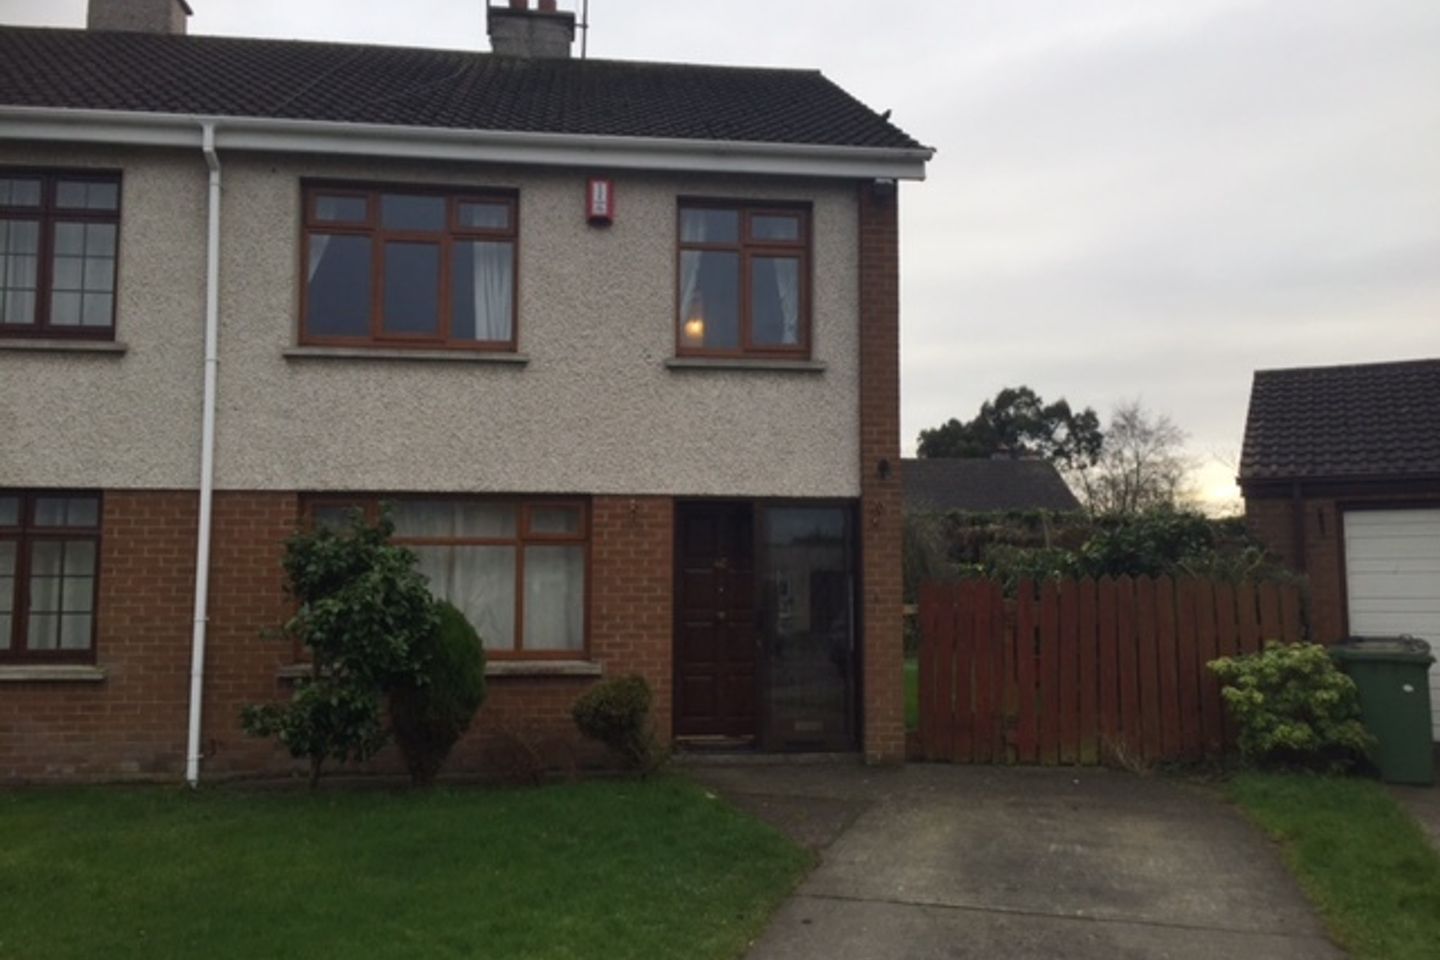 46 Meadow View, Avondale Park, Dundalk, Co. Louth